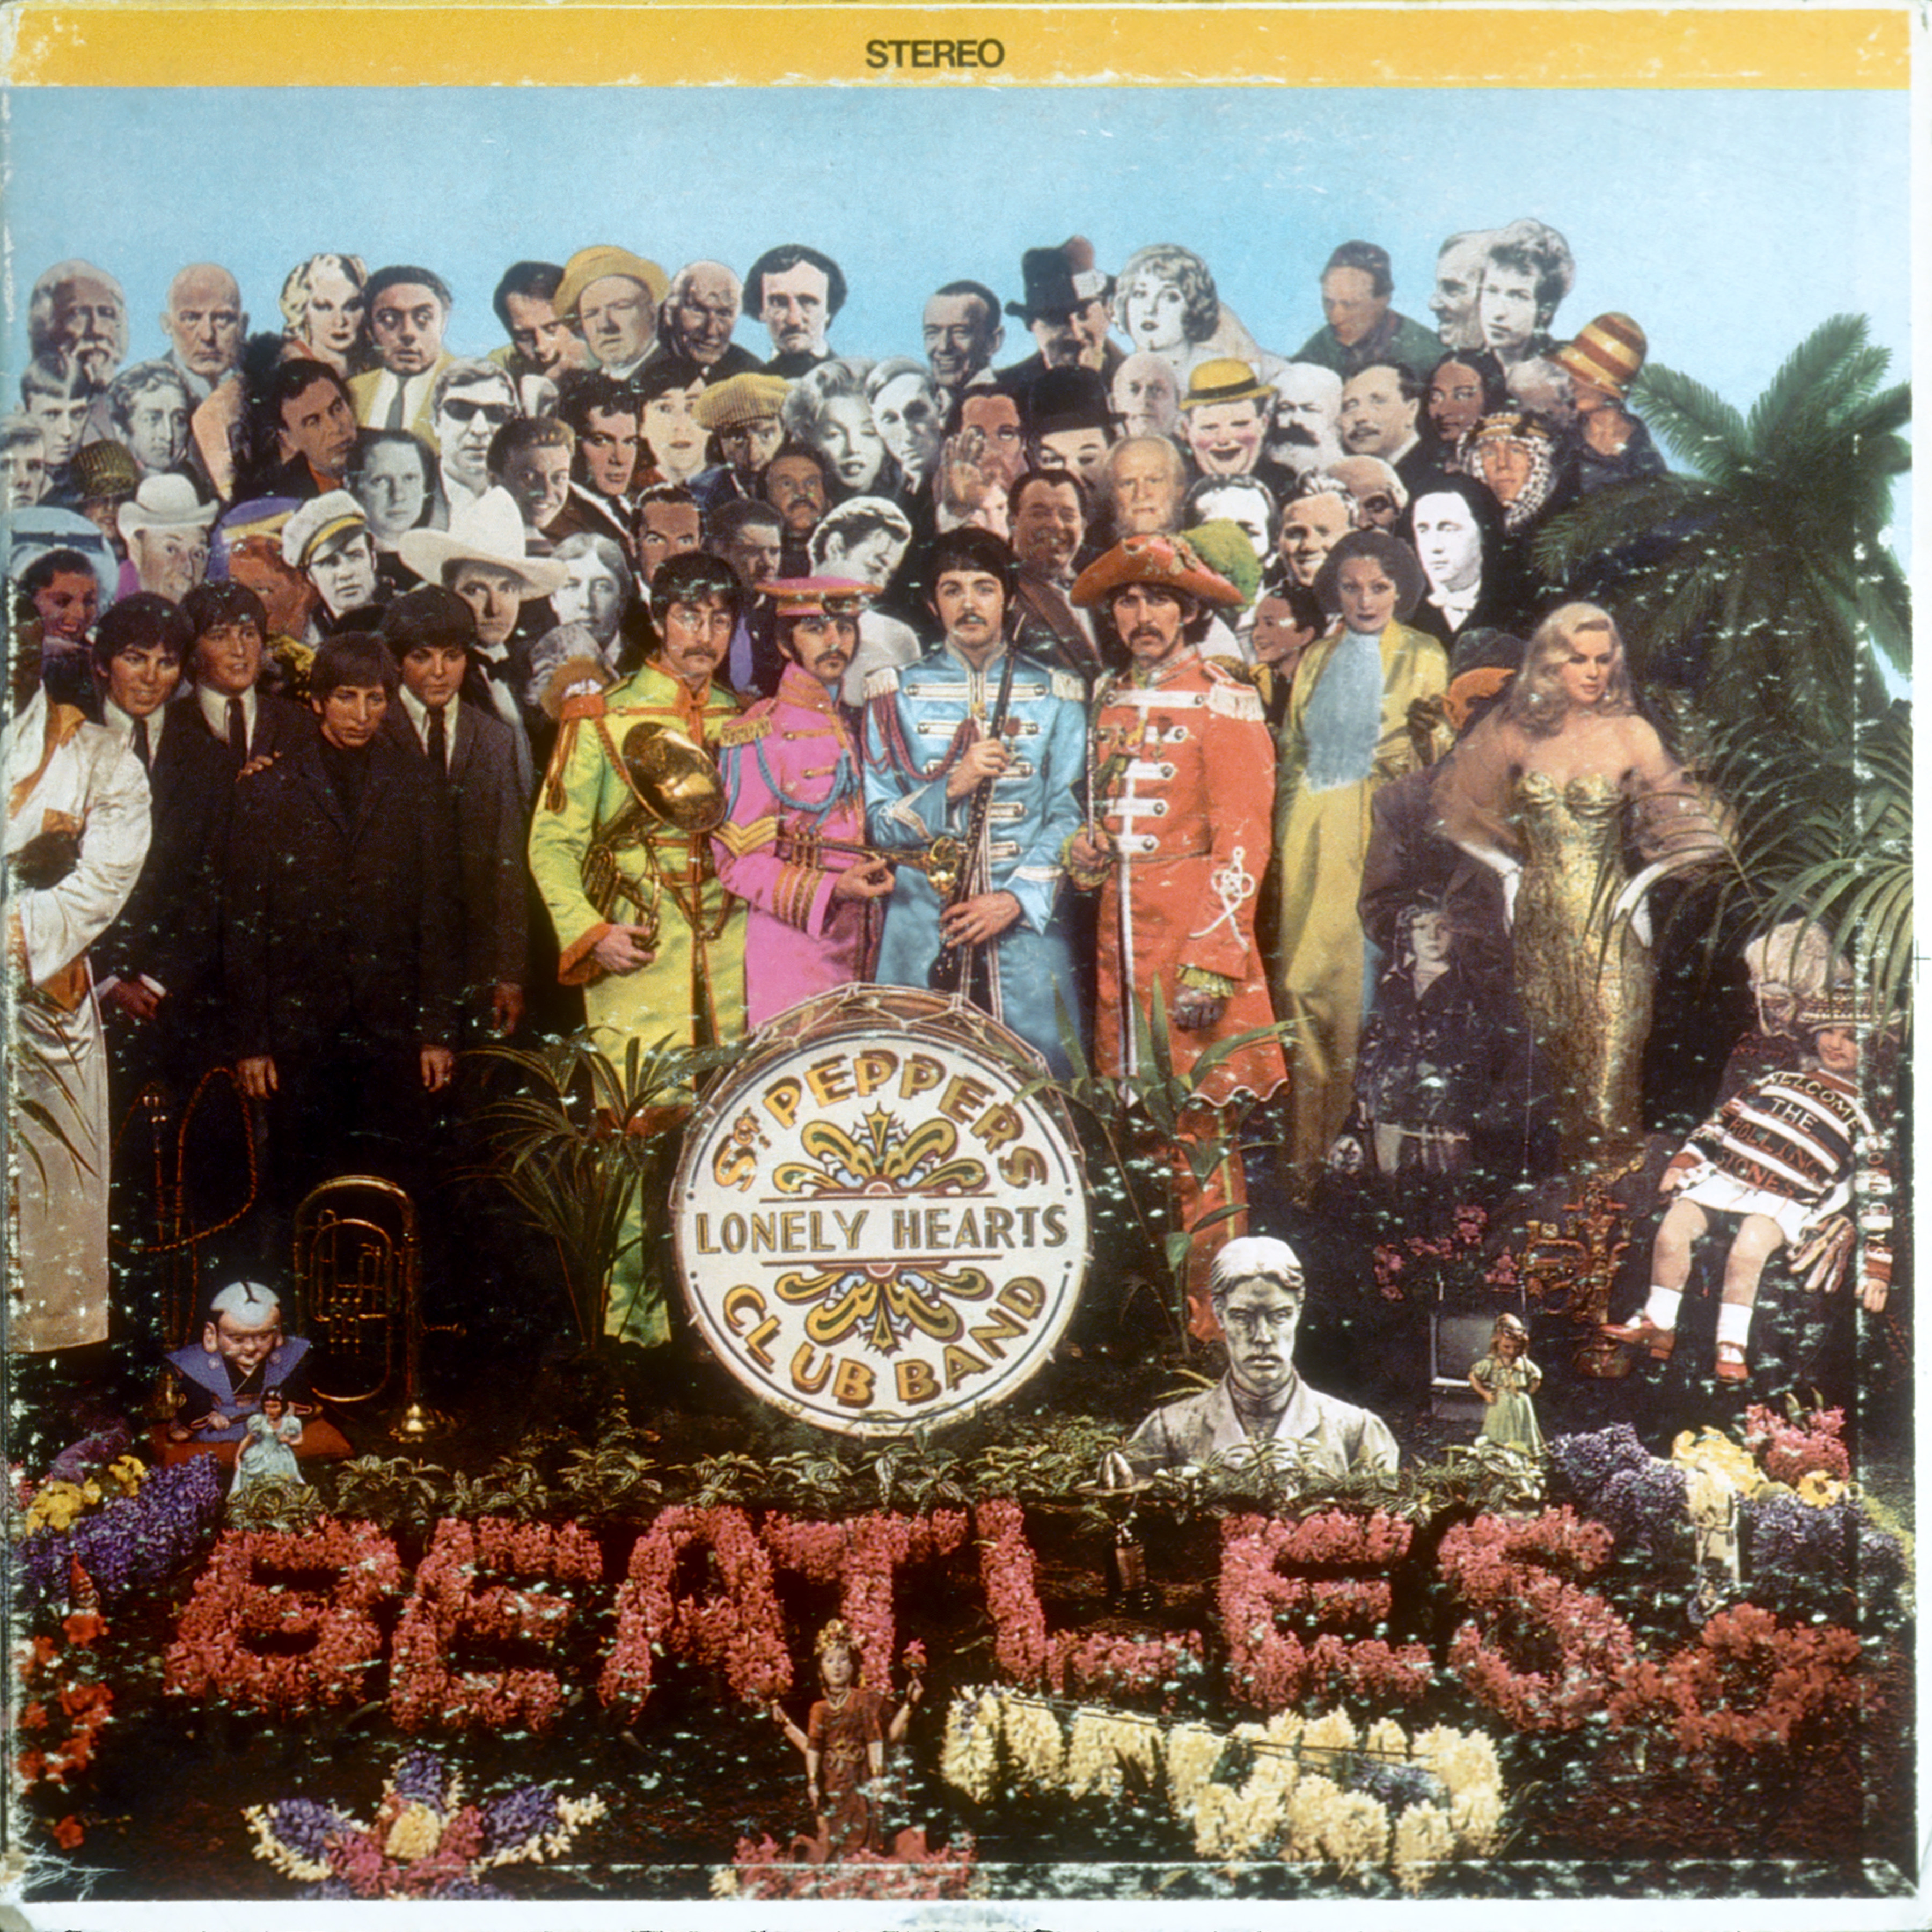 Sgt peppers